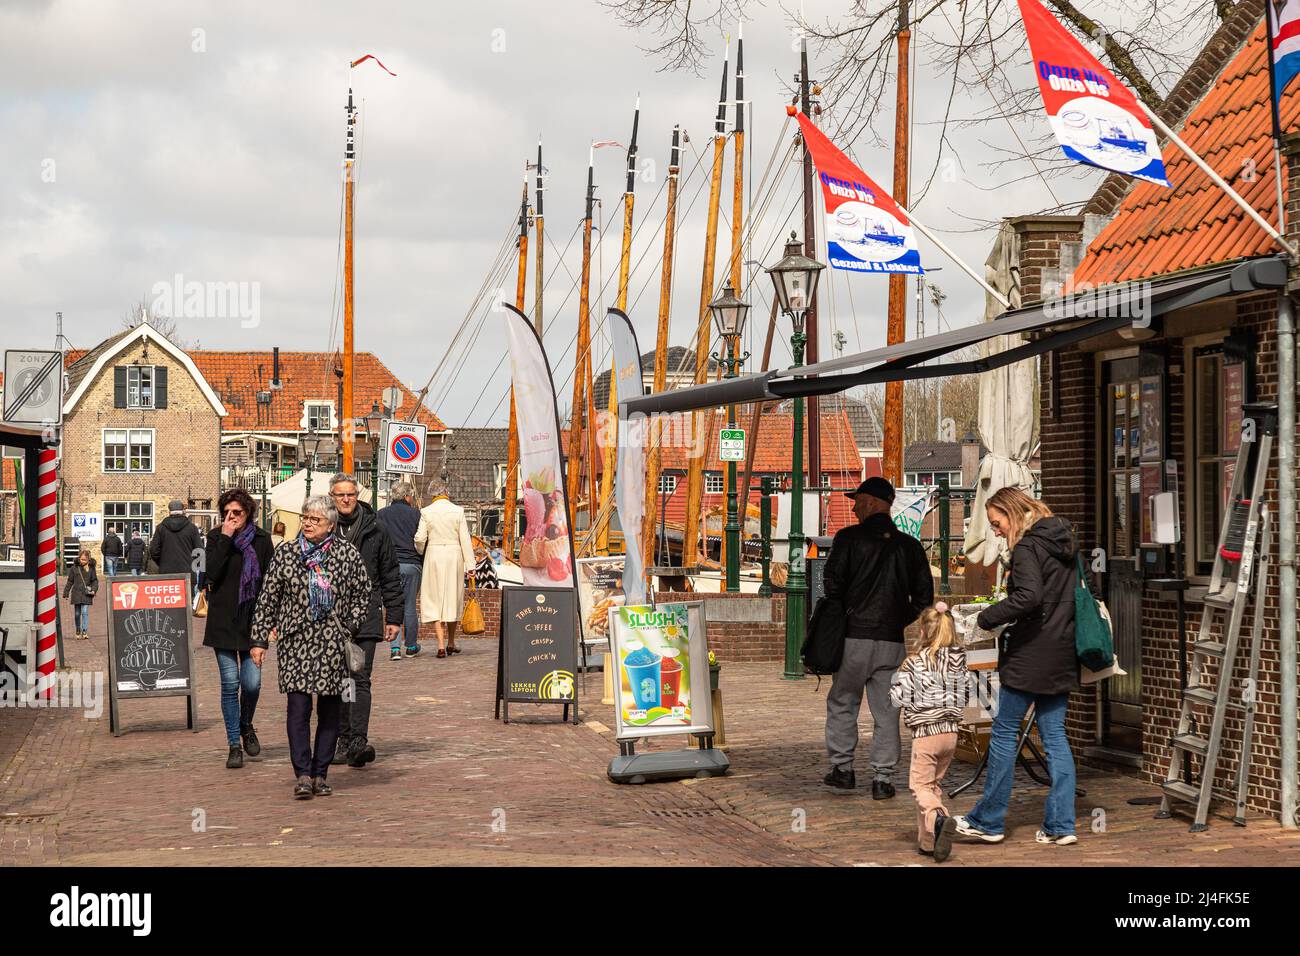 People walk on the quay of the old harbor in the center of the picturesque fishing village of Spakenburg. Stock Photo